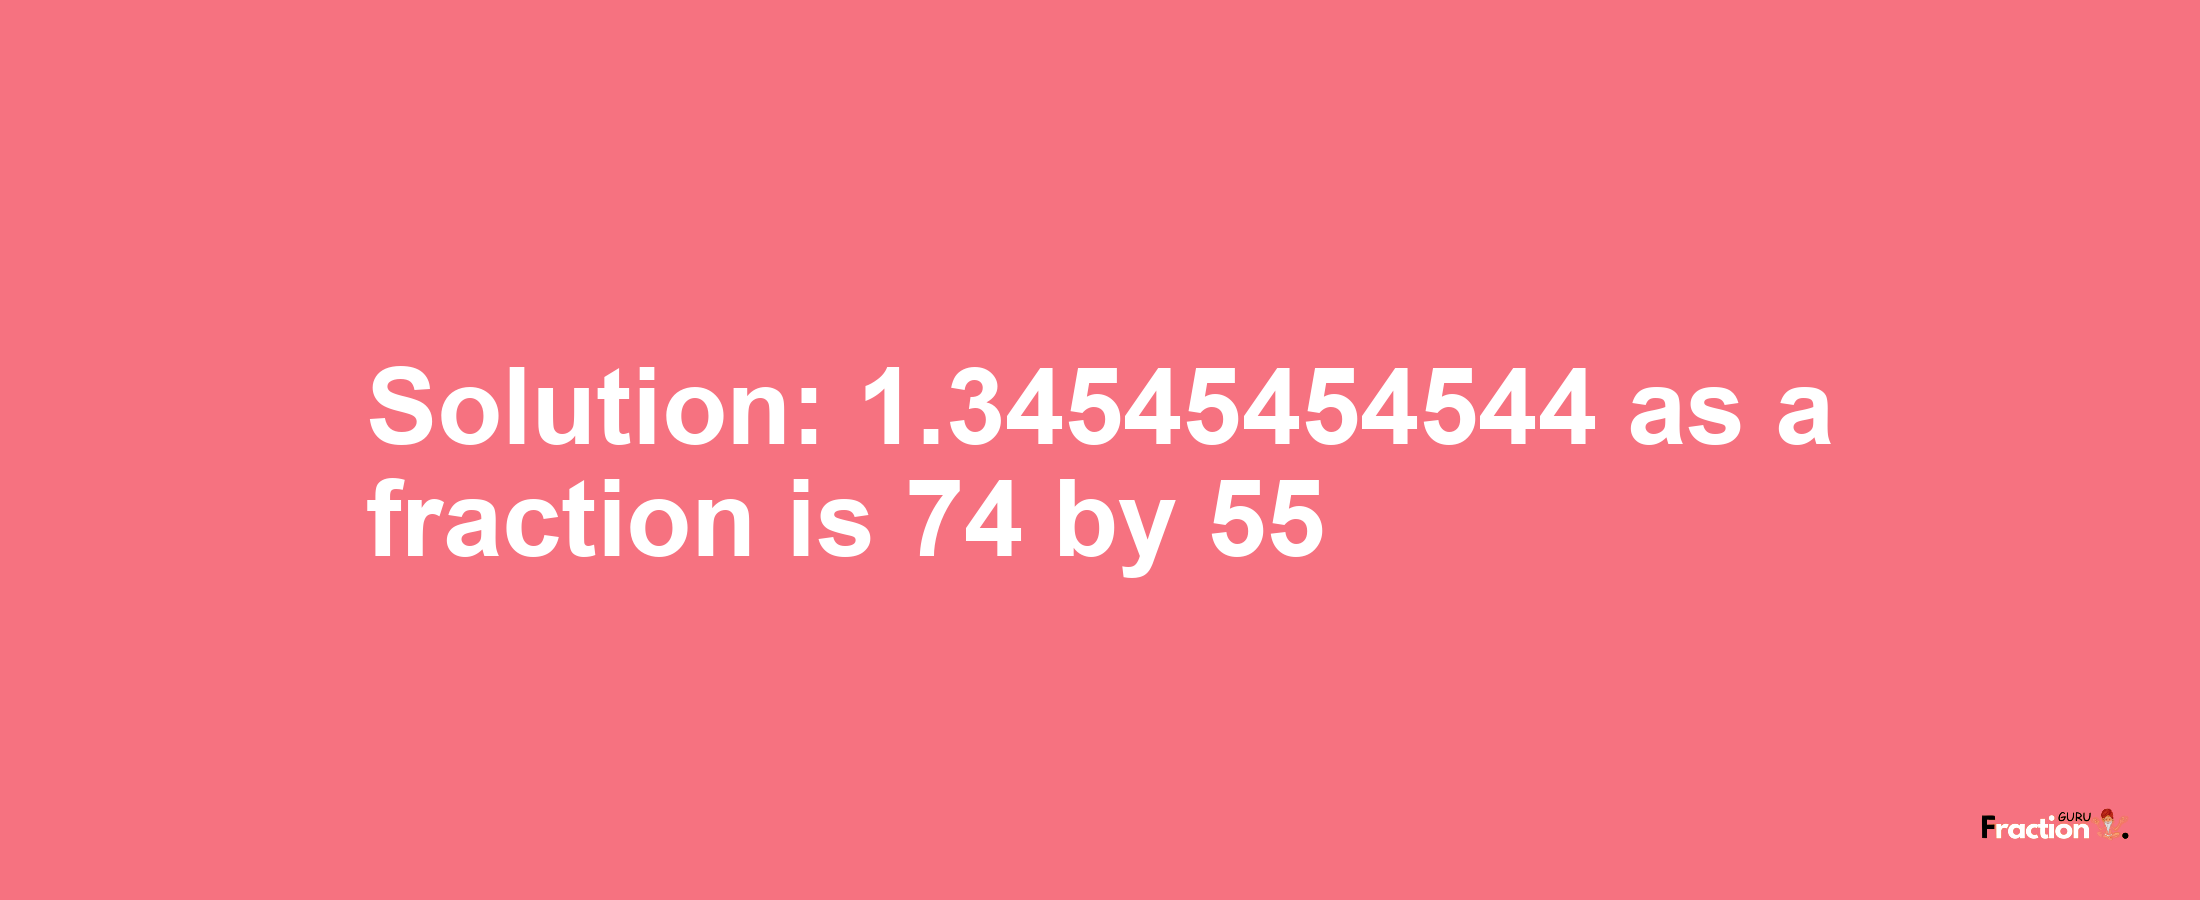 Solution:1.34545454544 as a fraction is 74/55